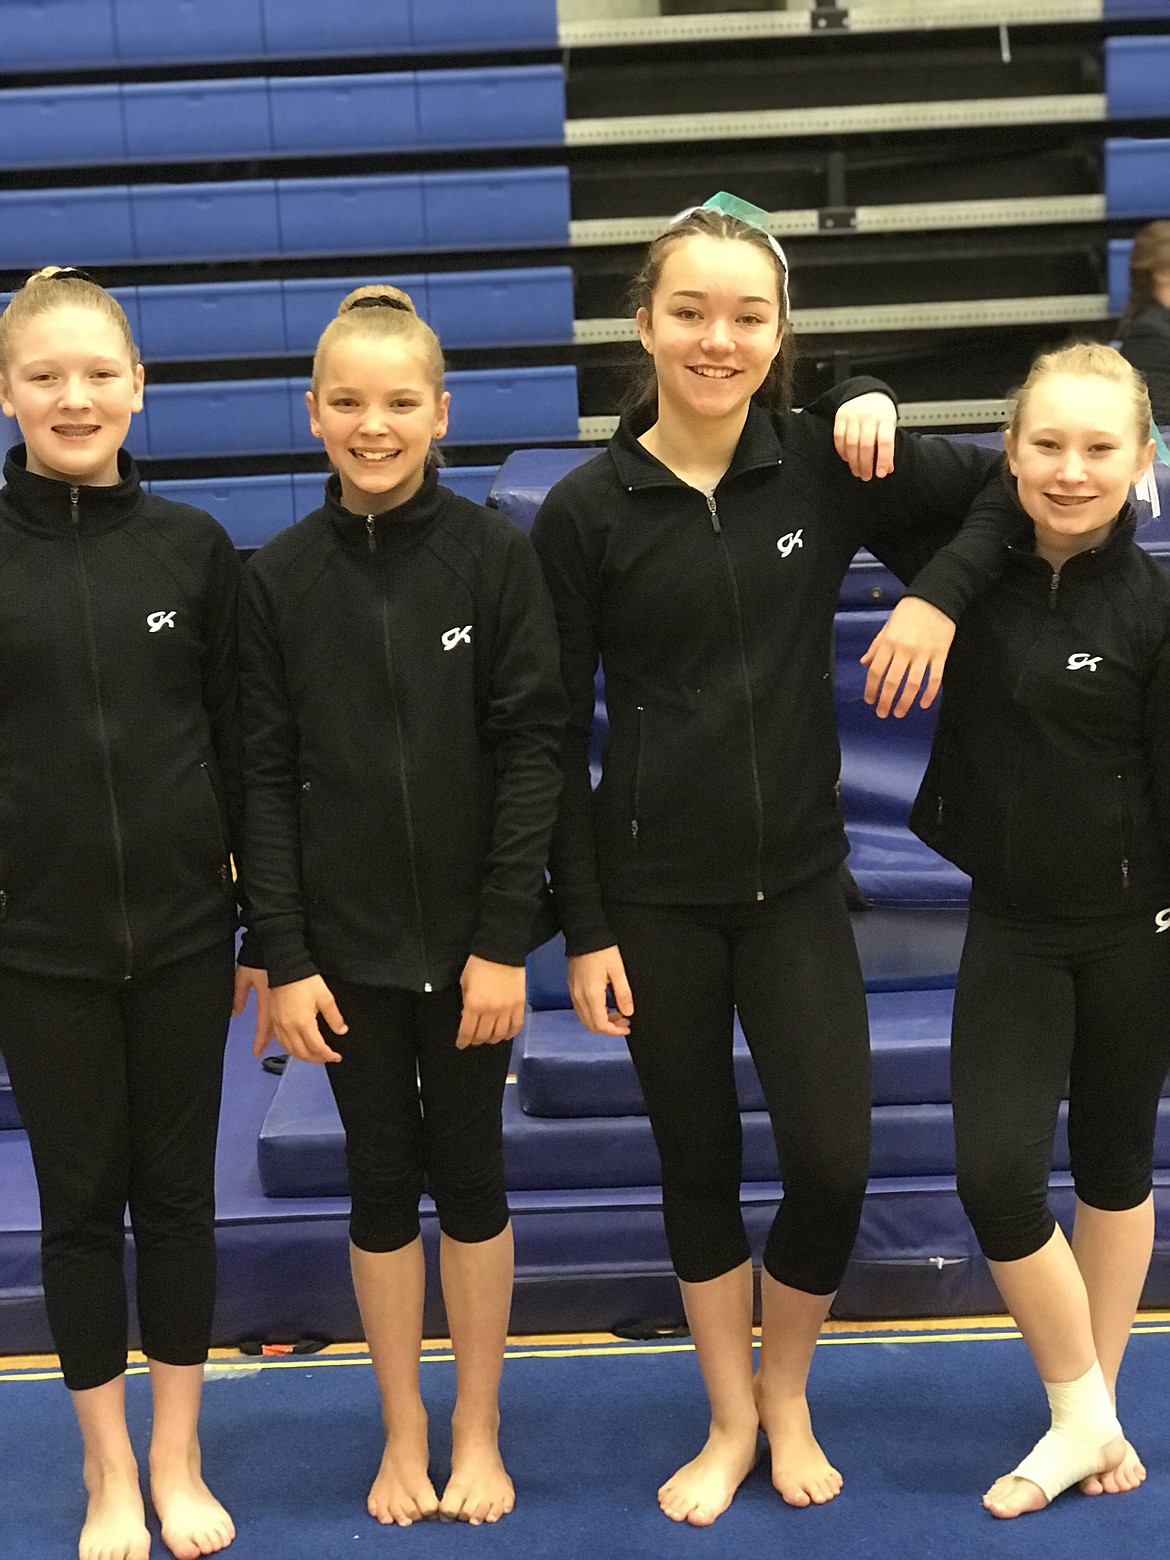 Courtesy photo
Avant Coeur Xcel silver gymnasts competing at the recent state championships in Boise: From left, Cameron Cox, Amberly Johnson, Sammy Pereira and Avary McAllister.